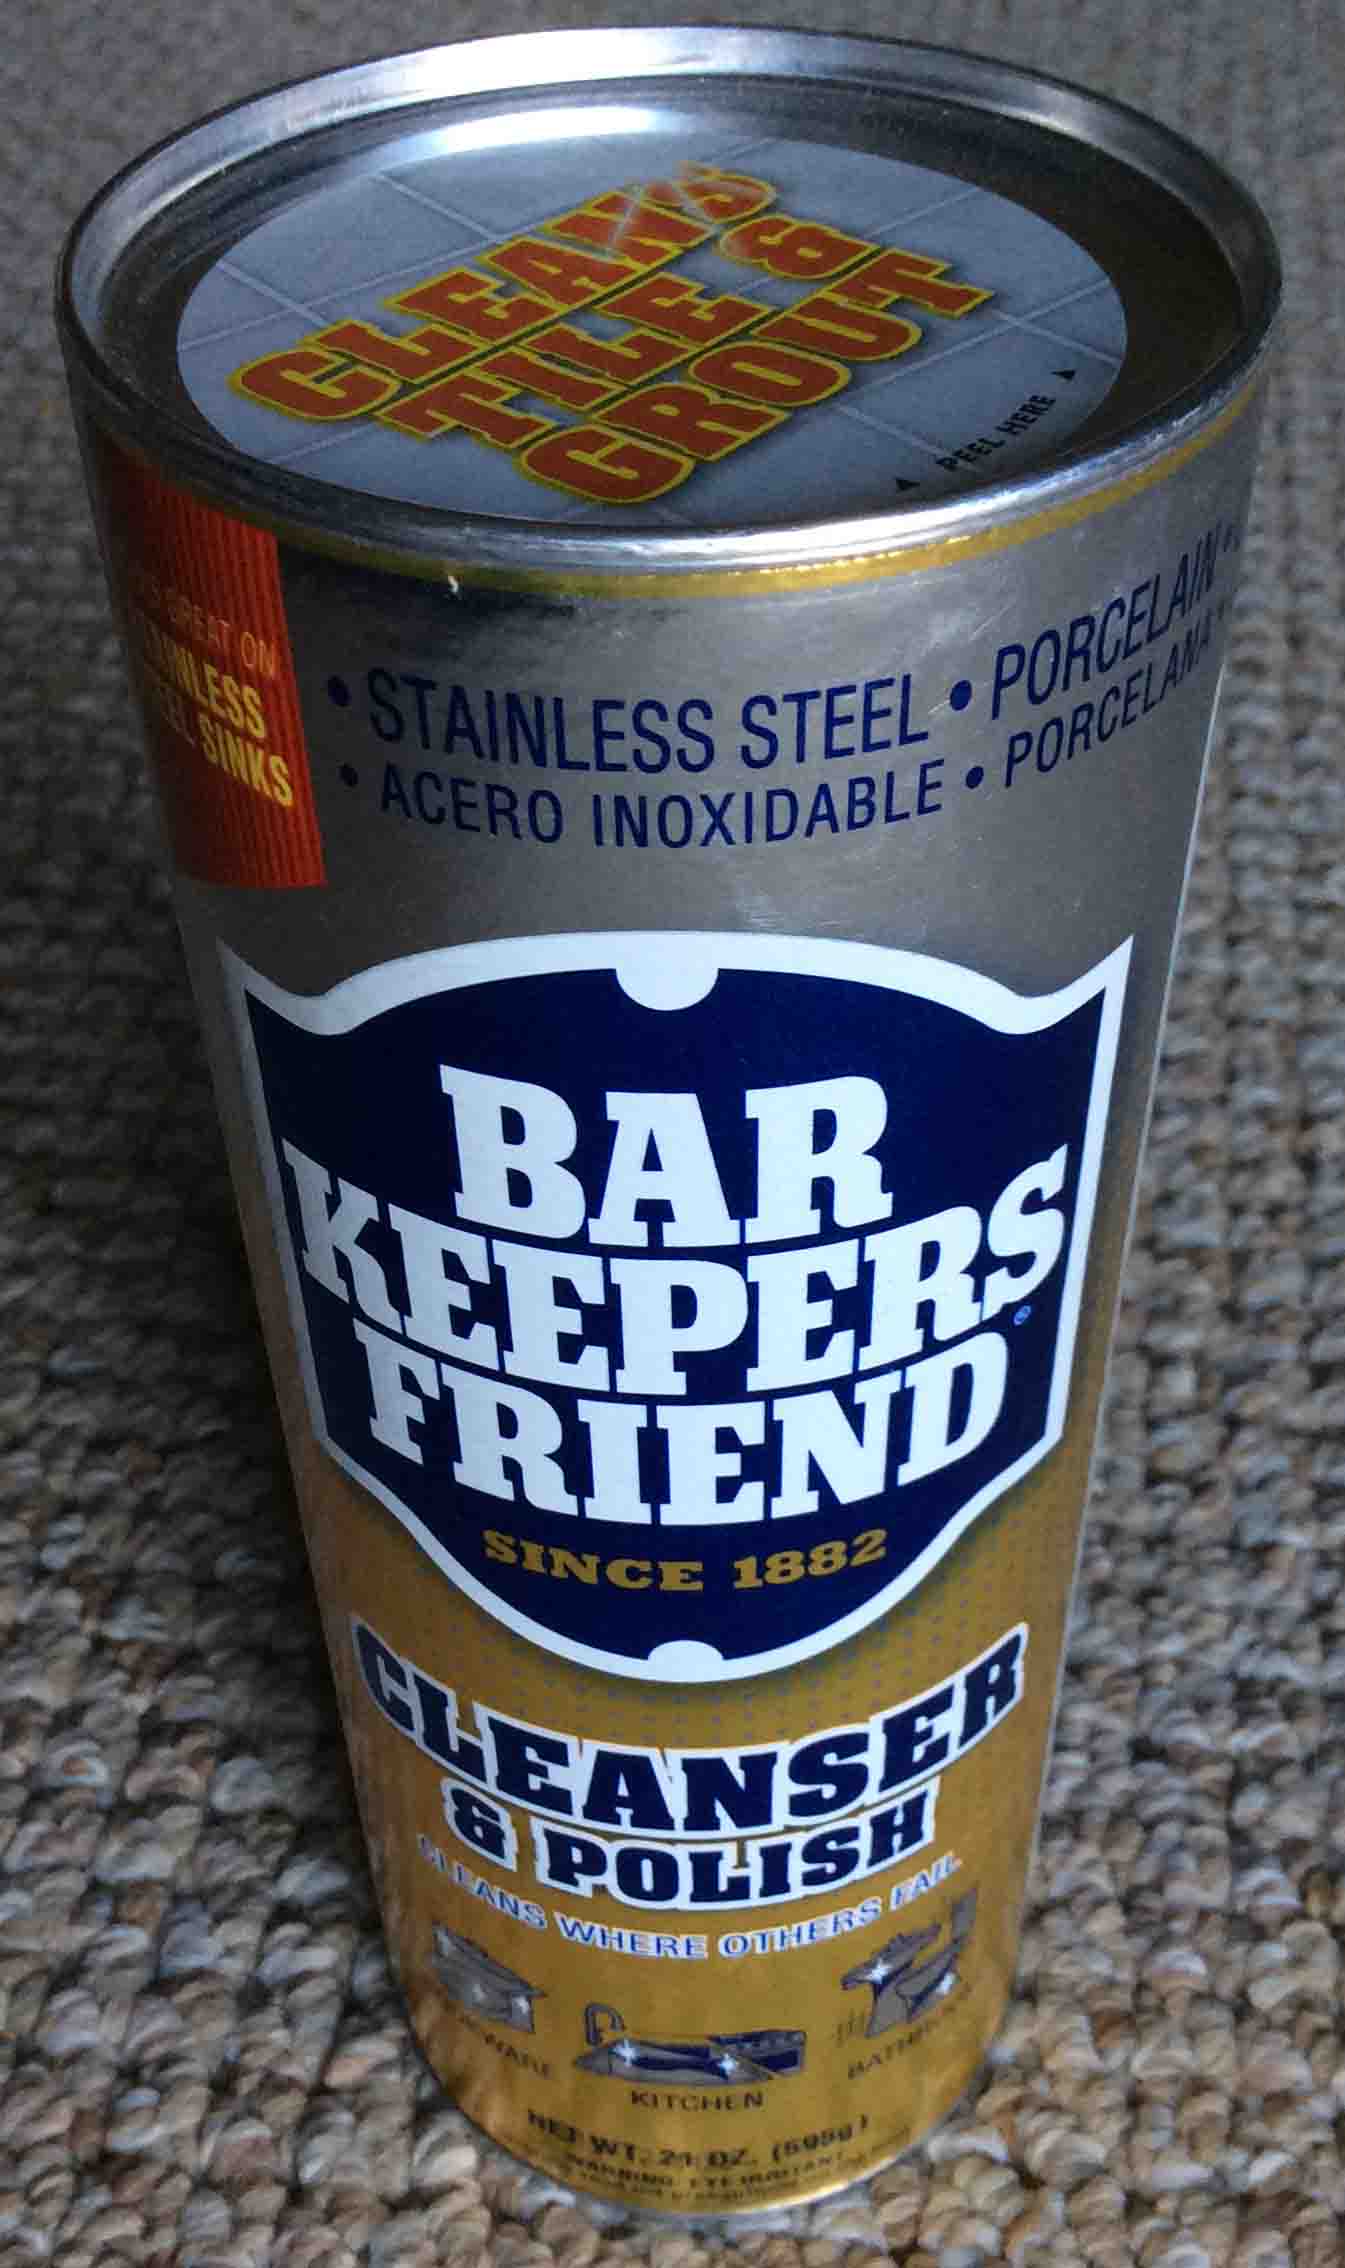 Bar Keepers Friend Cleanser and Polish